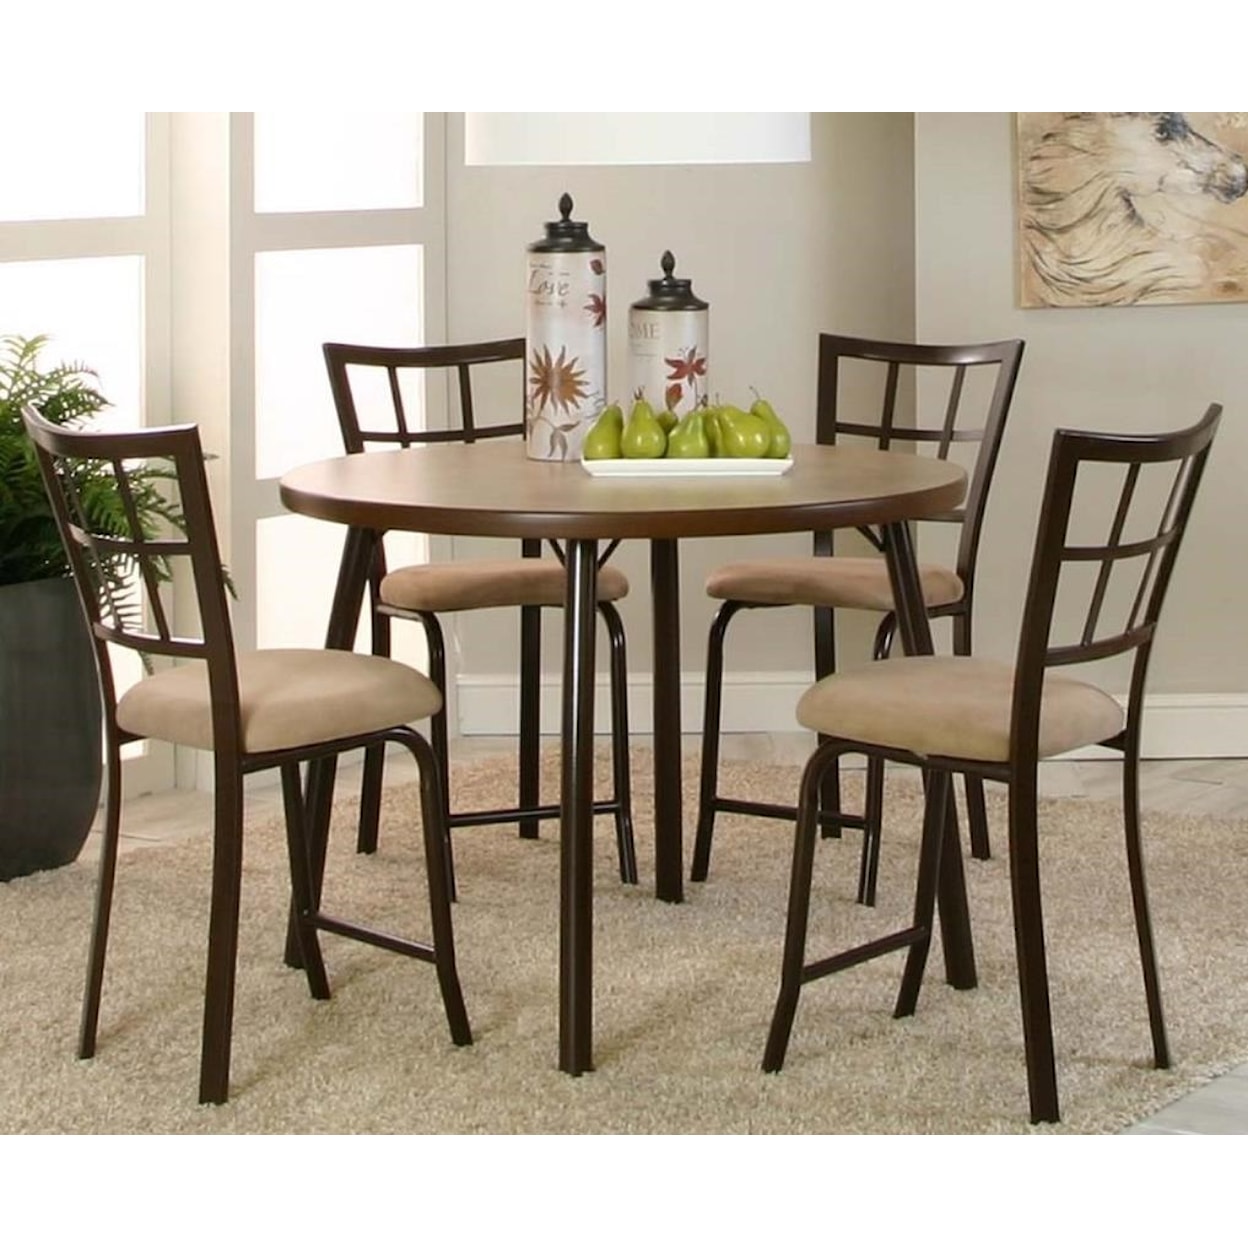 Cramco, Inc Cramco Dinettes - Vision 5pc Dining Room Group